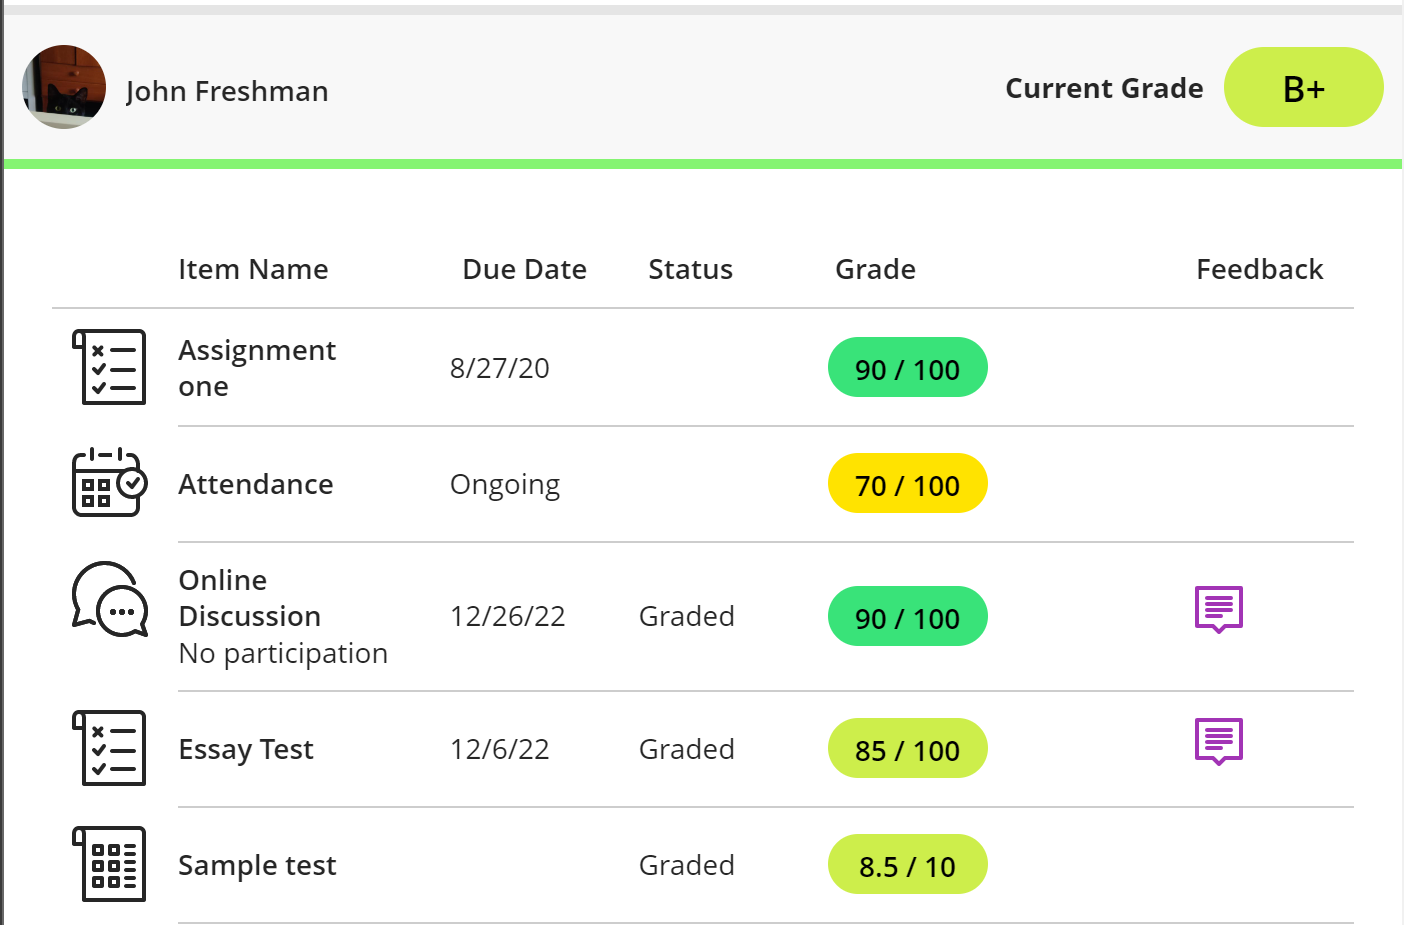 gradebook view containing items with feedback